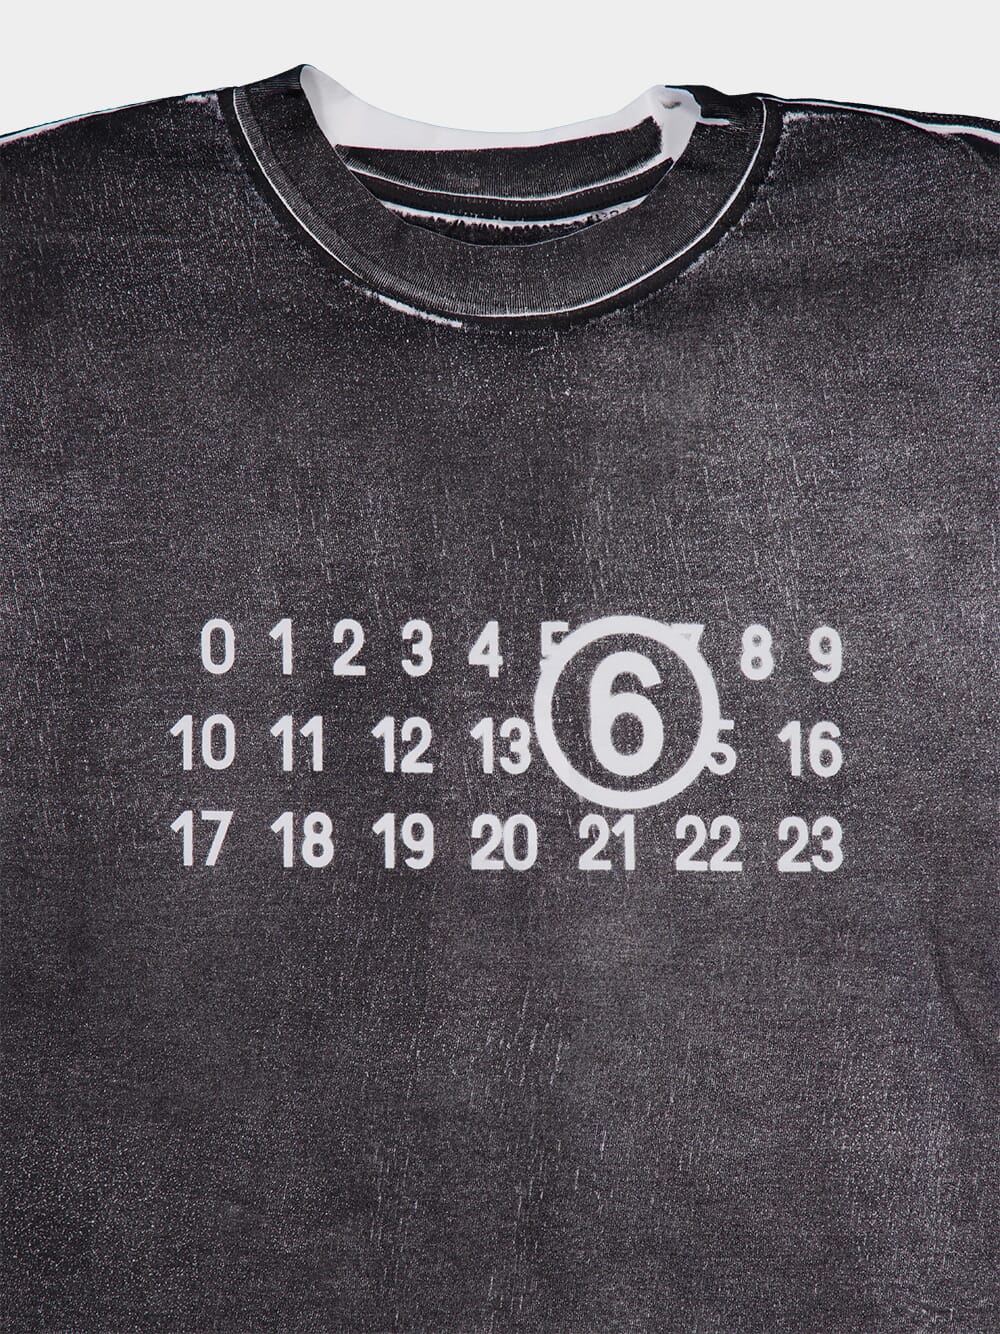 MM6 Maison MargielaSignature Numbers Motif Two-Tone T-Shirt at Fashion Clinic